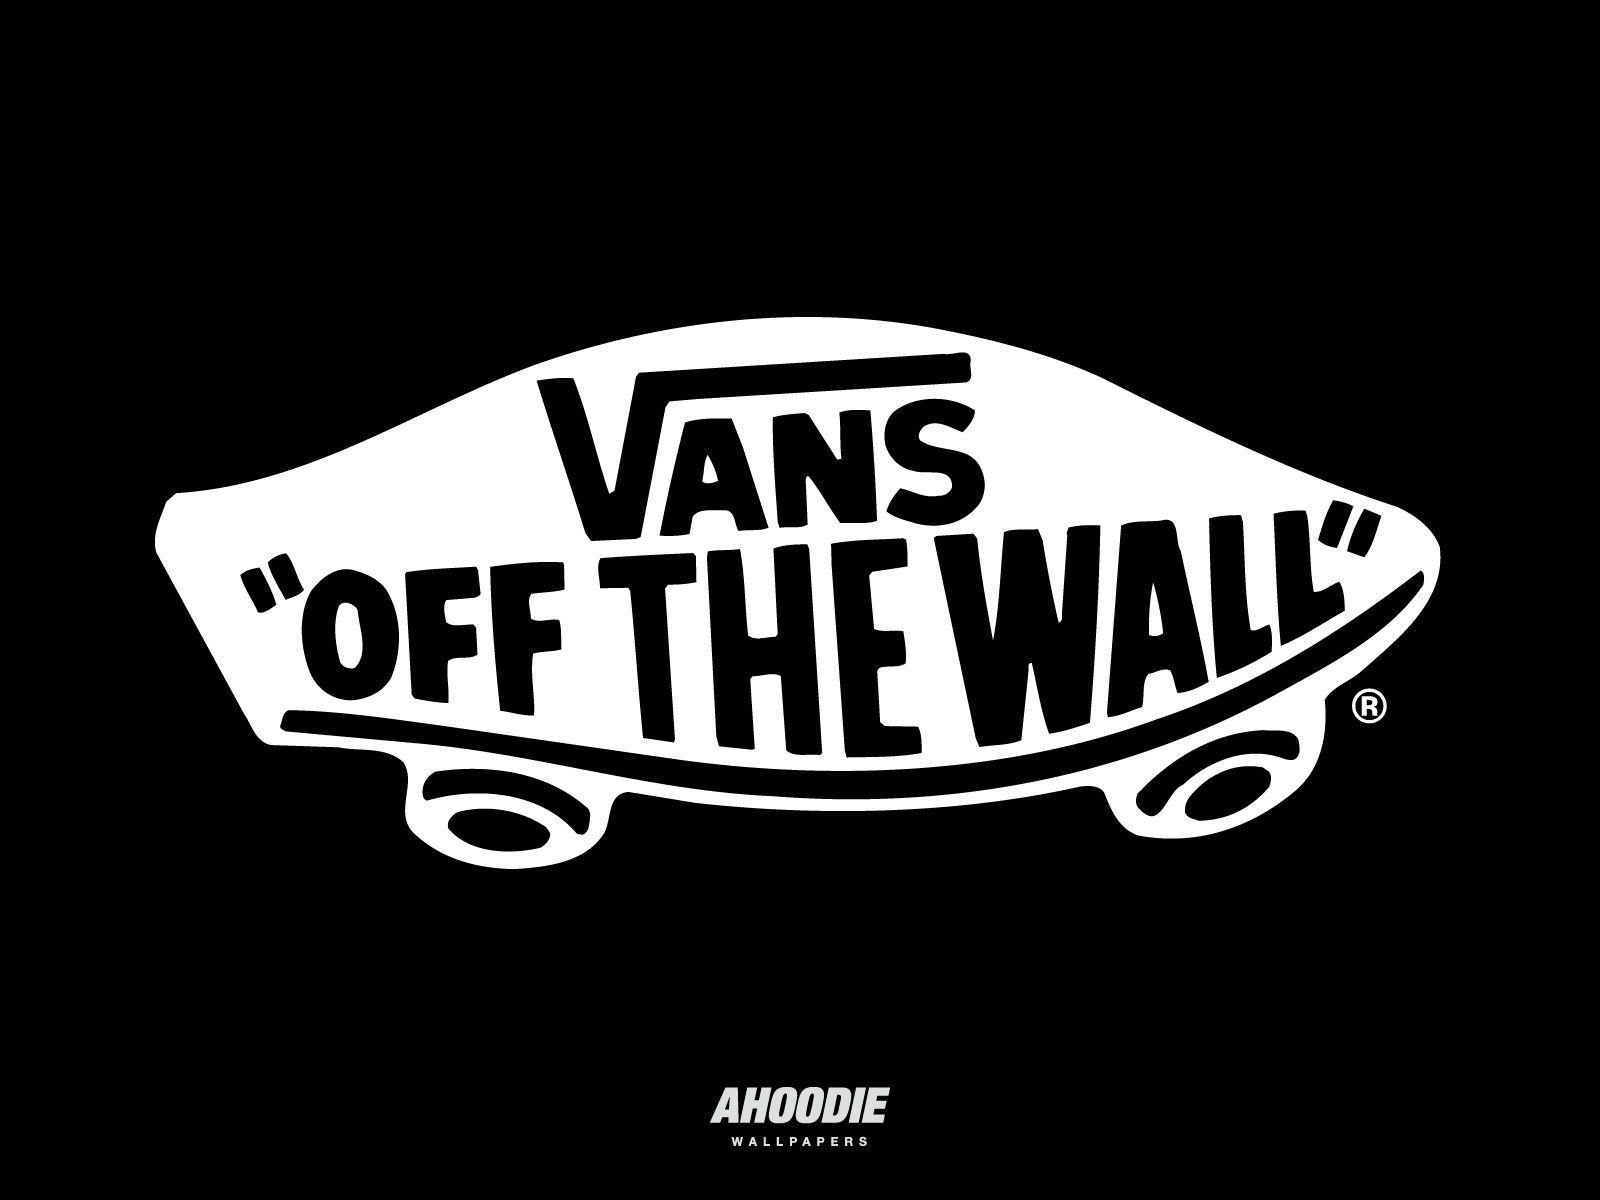 Black Off the Wall Vans Logo - Vans. Havn't worn them in years but I think I might have to pick up ...